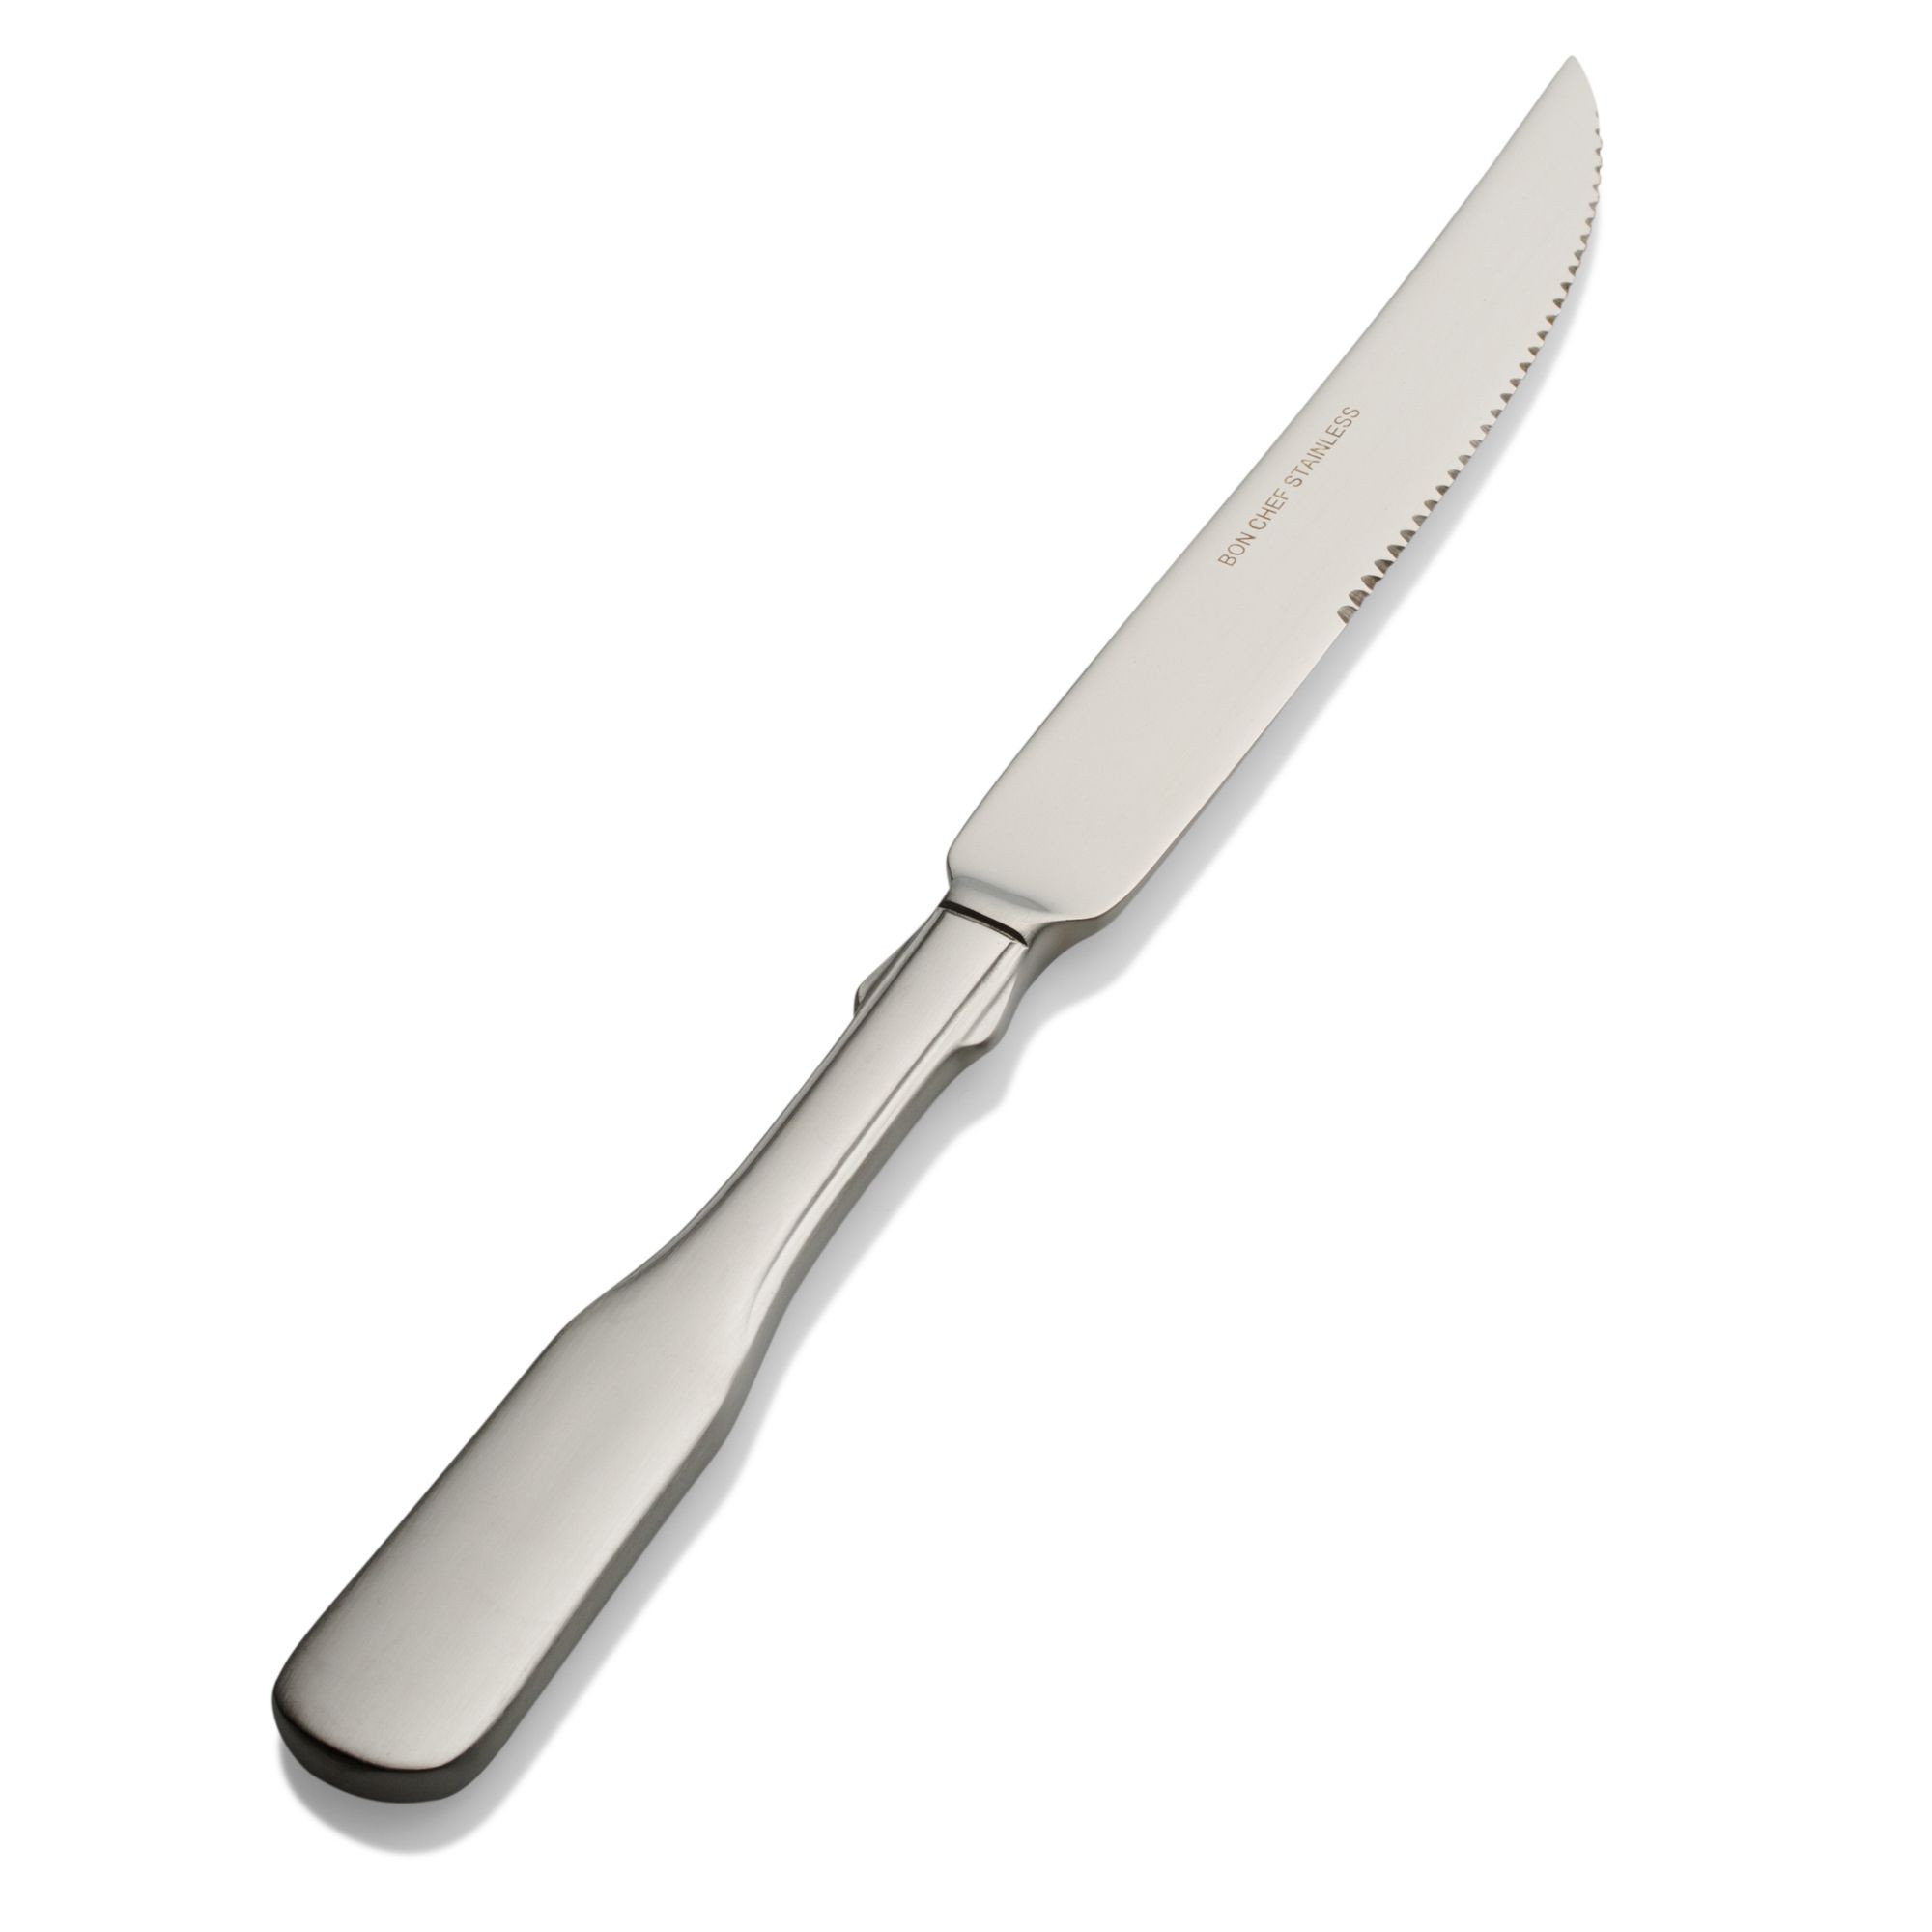 Bon Chef S1915 Liberty 18/8 Stainless Steel European Solid Handle Steak Knife